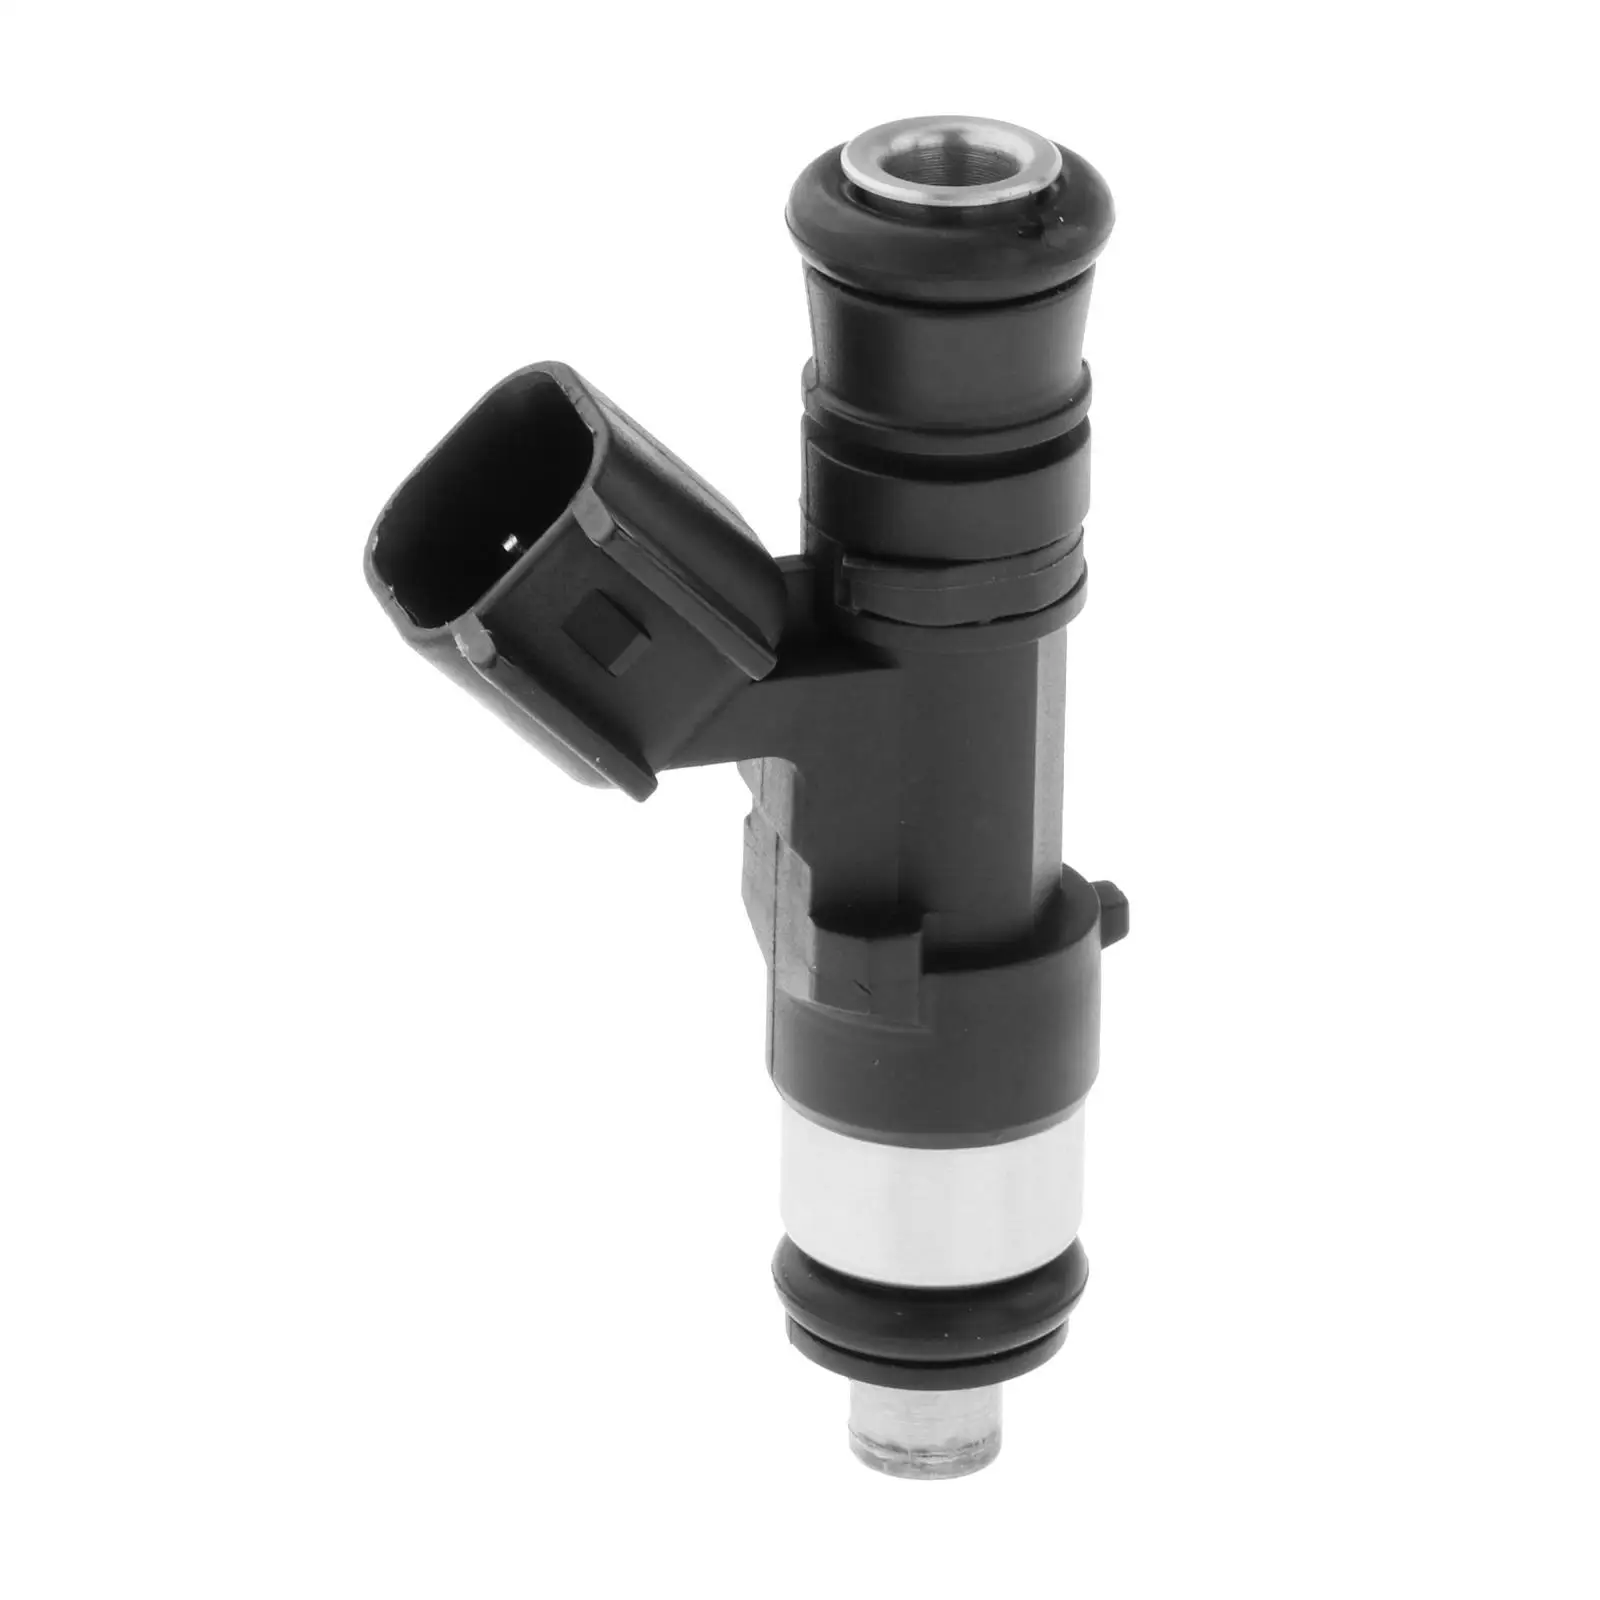 Fuel Injector Fits for Yamaha Outboard Motor 4 Stroke 200HP Accessories Replace 6DA-13761-00 Parts